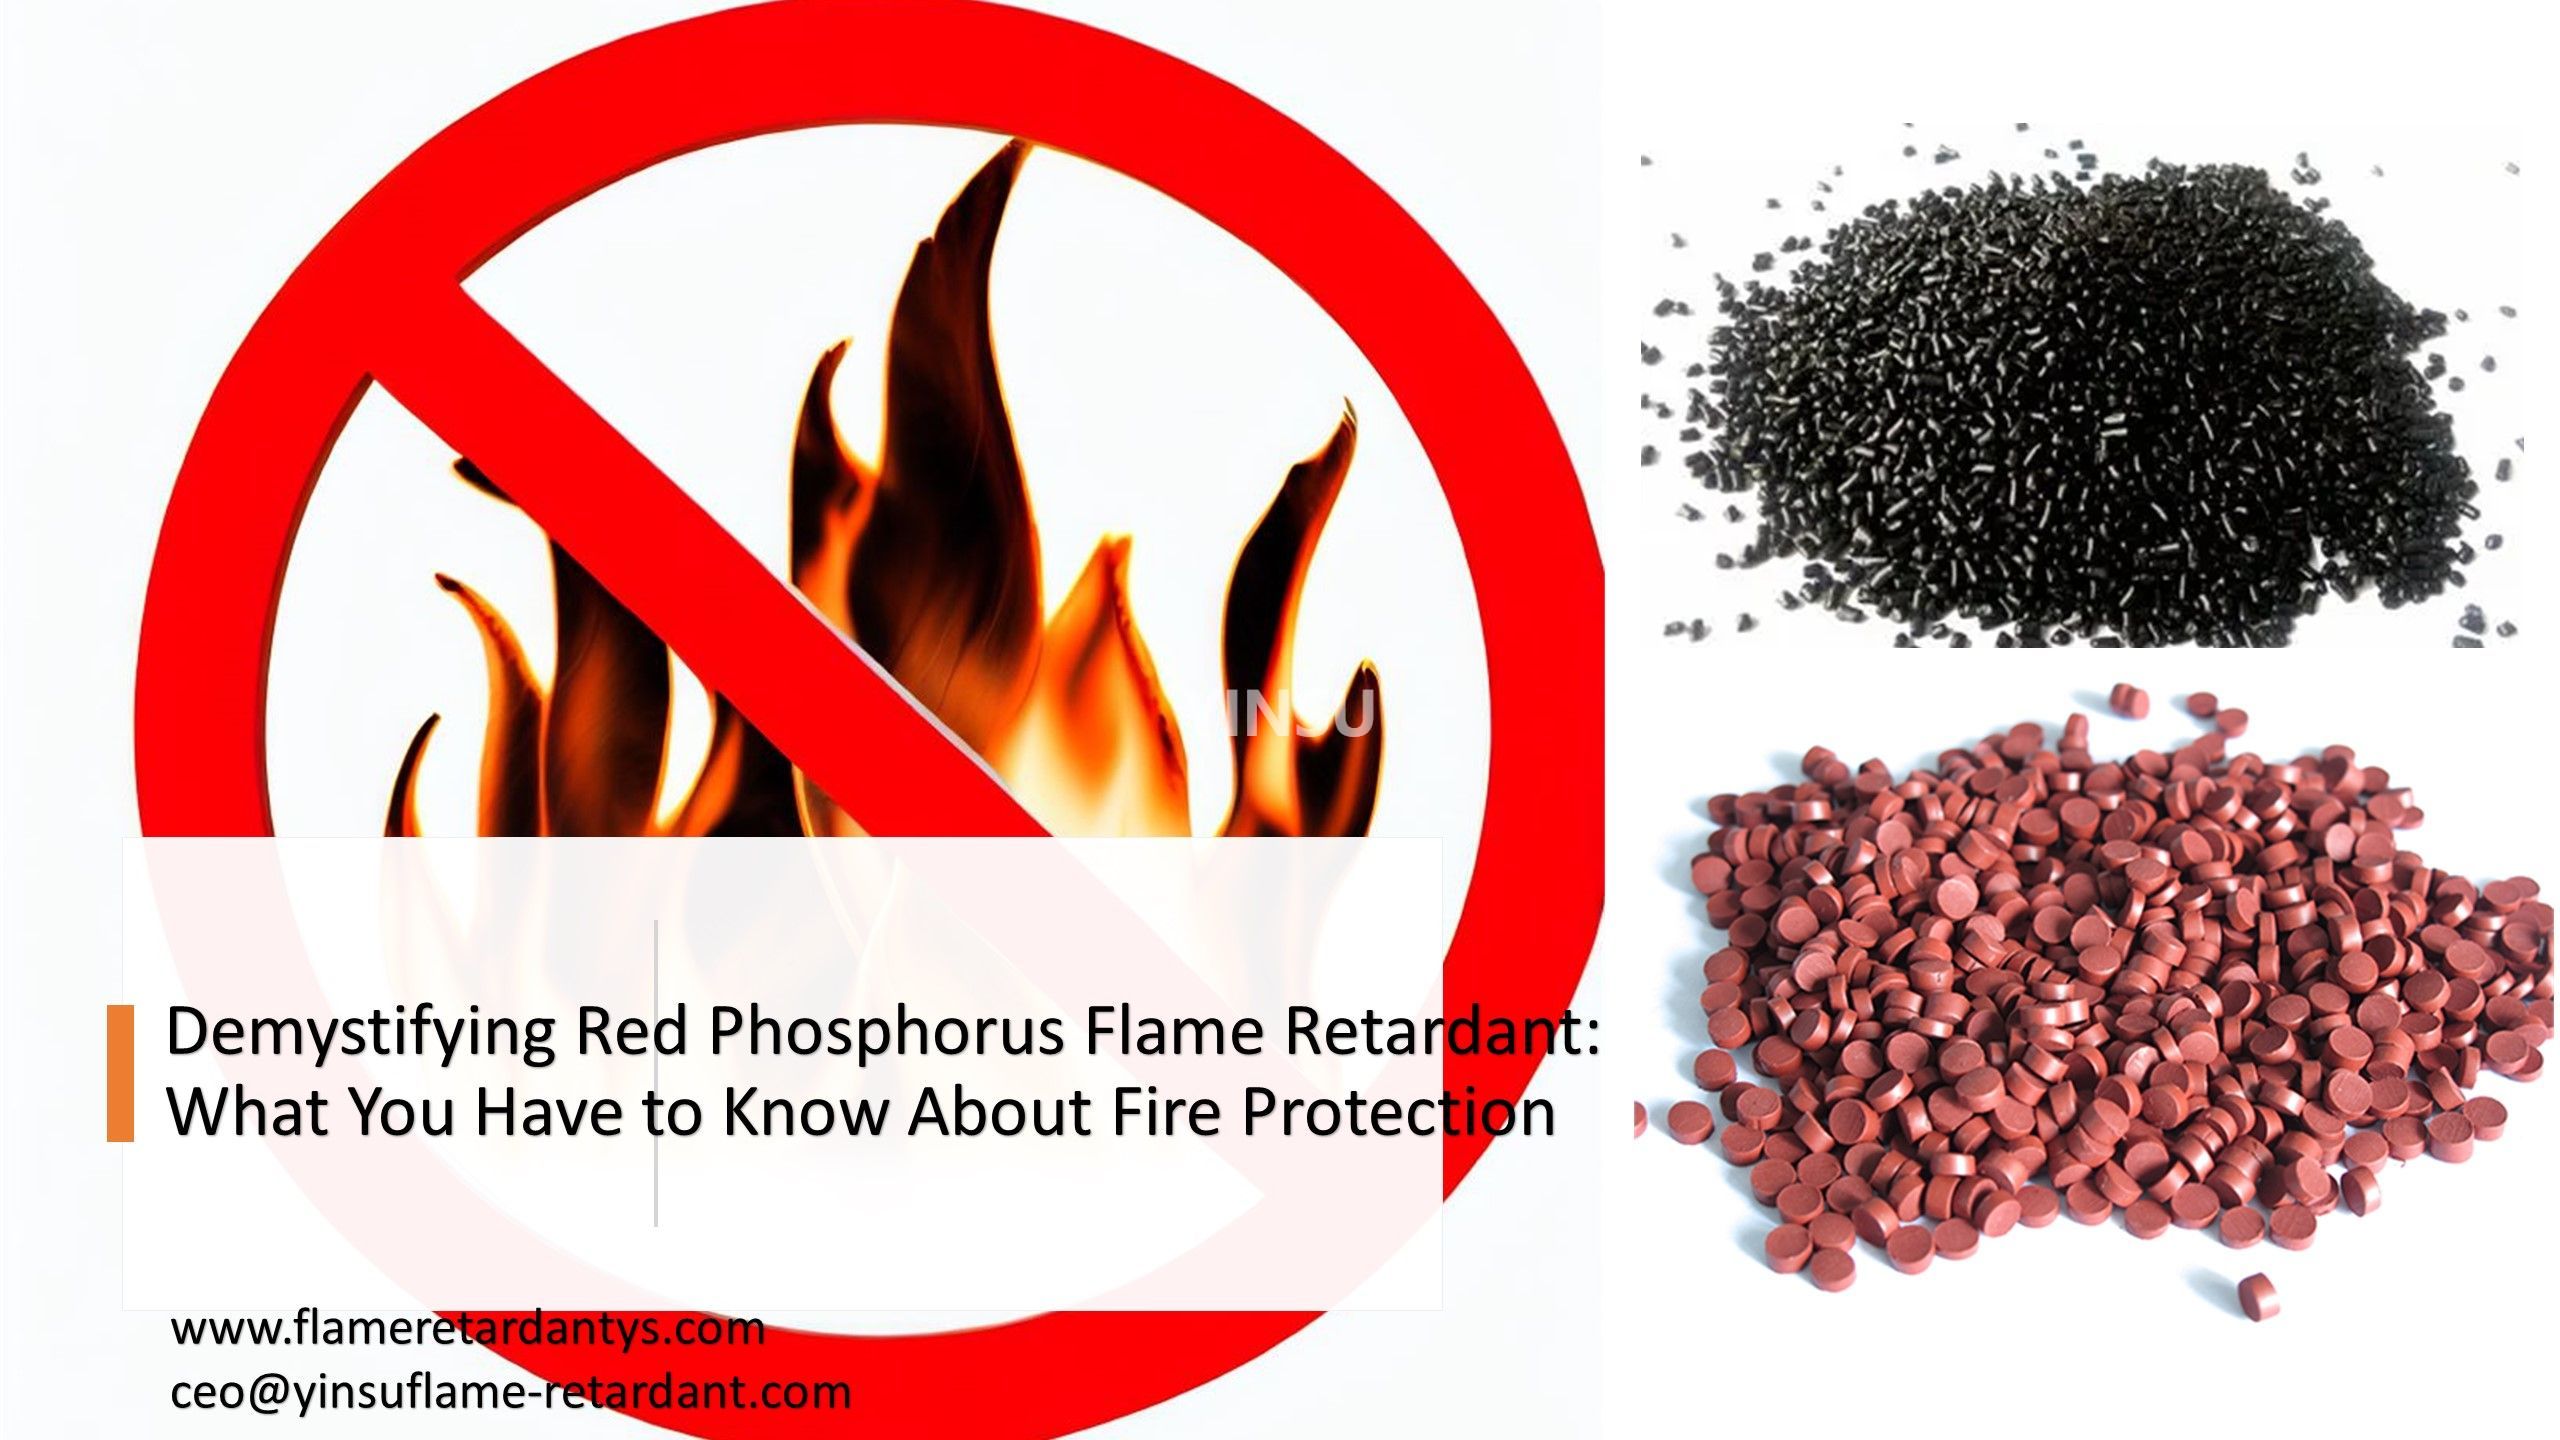 8. Demystifying Red Phosphorus Flame Retardant What You Have to Know About Fire Protection